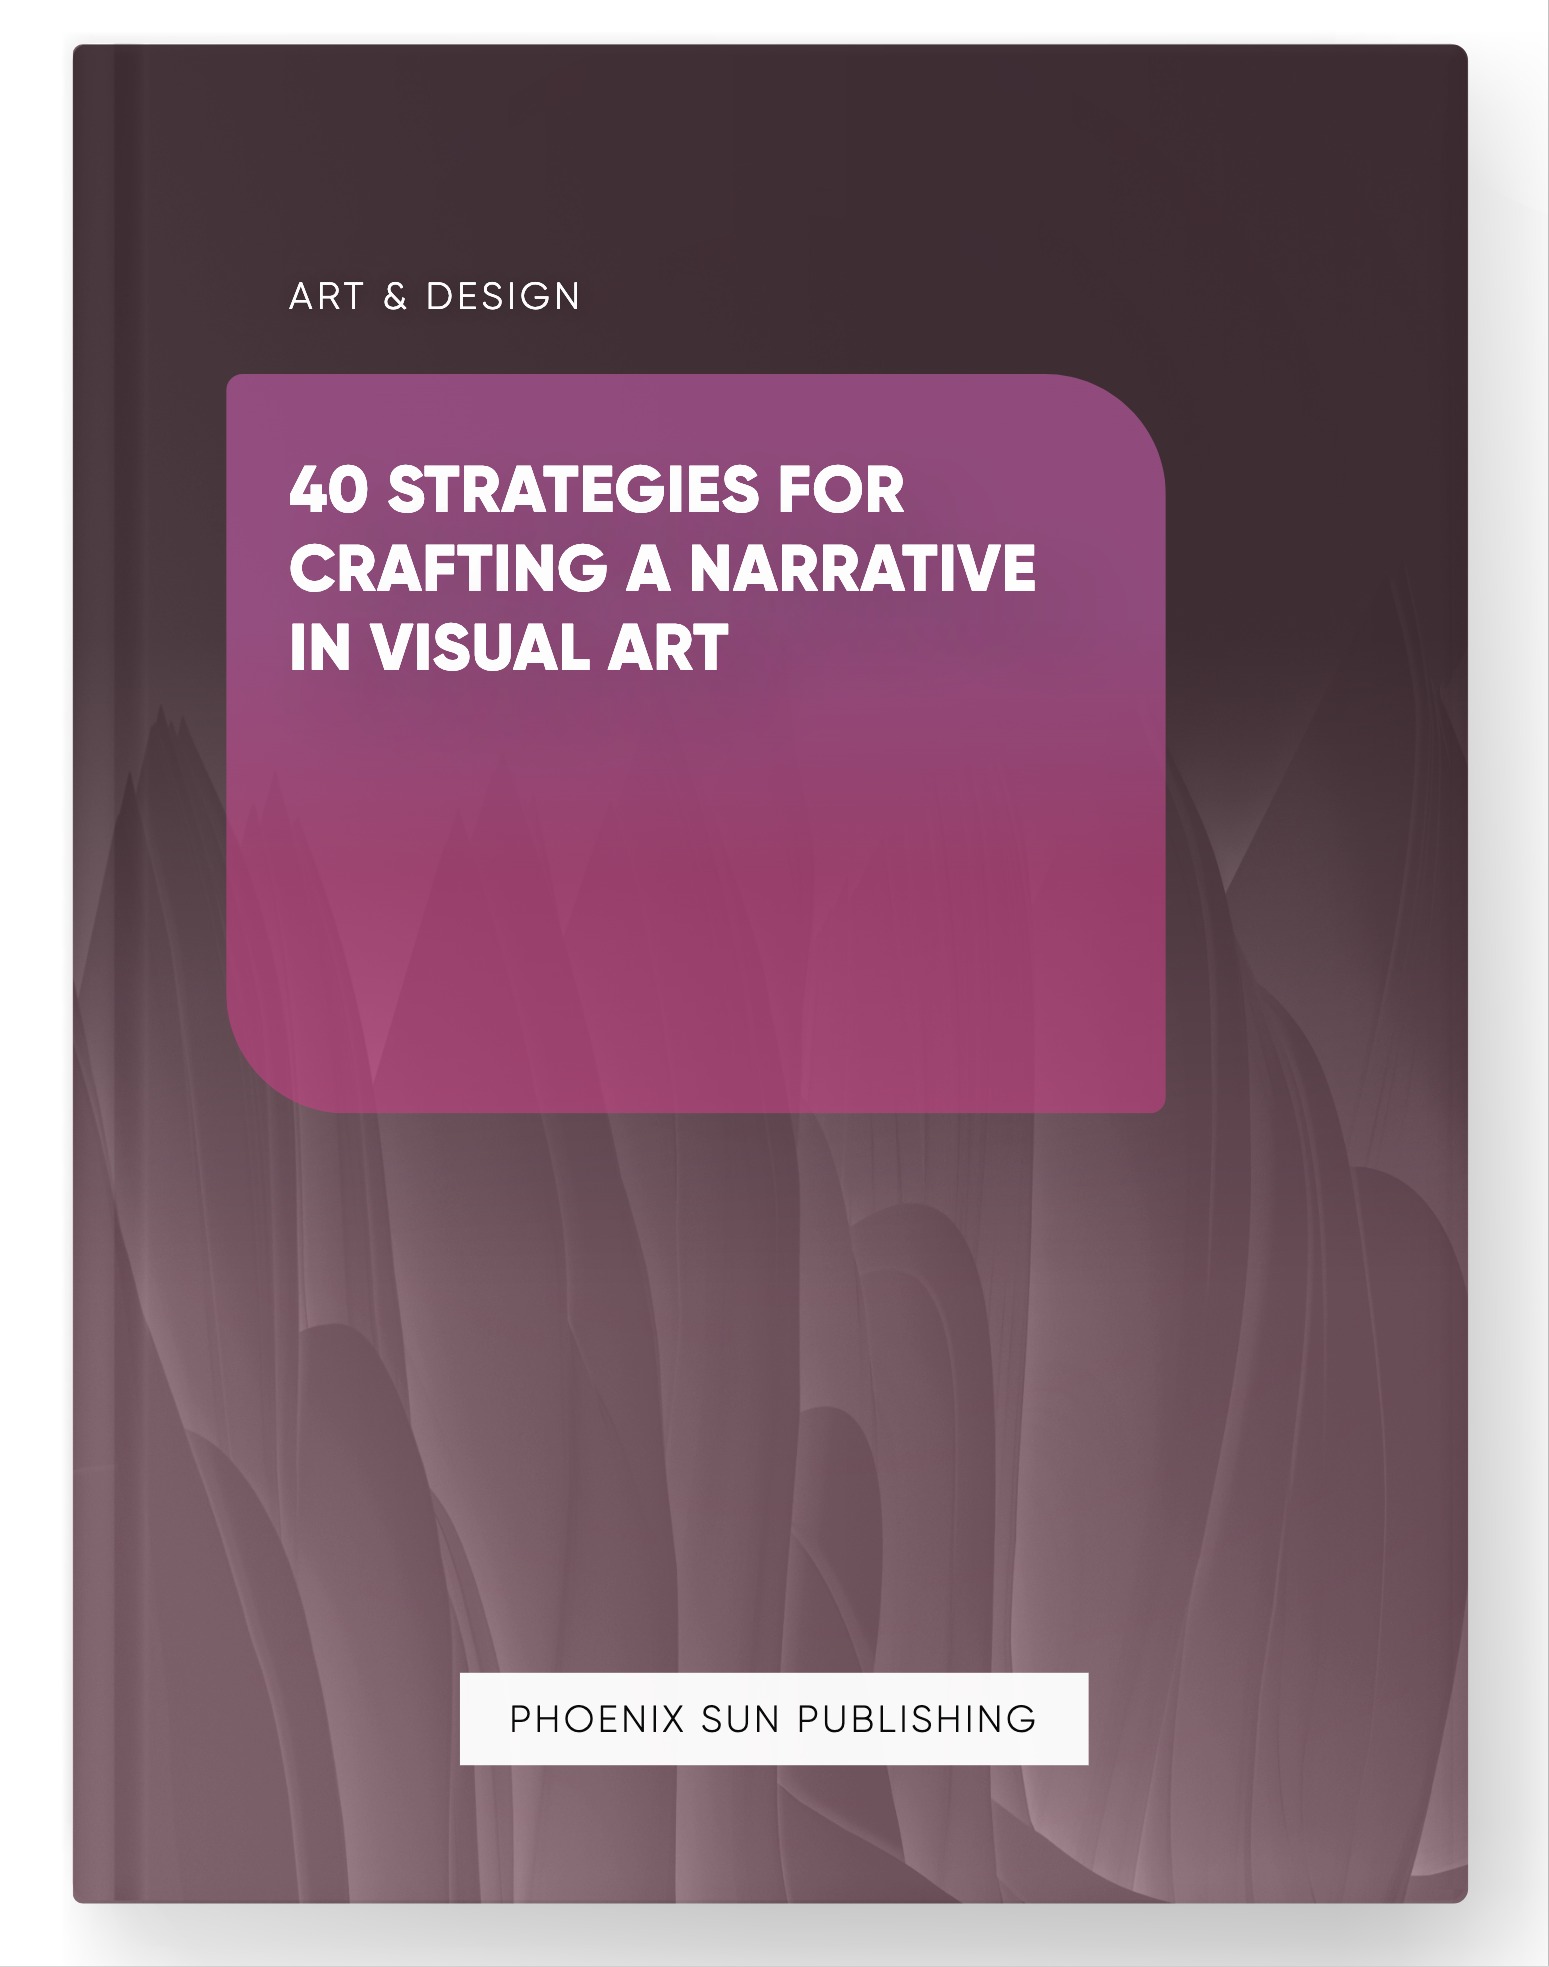 40 Strategies for Crafting a Narrative in Visual Art